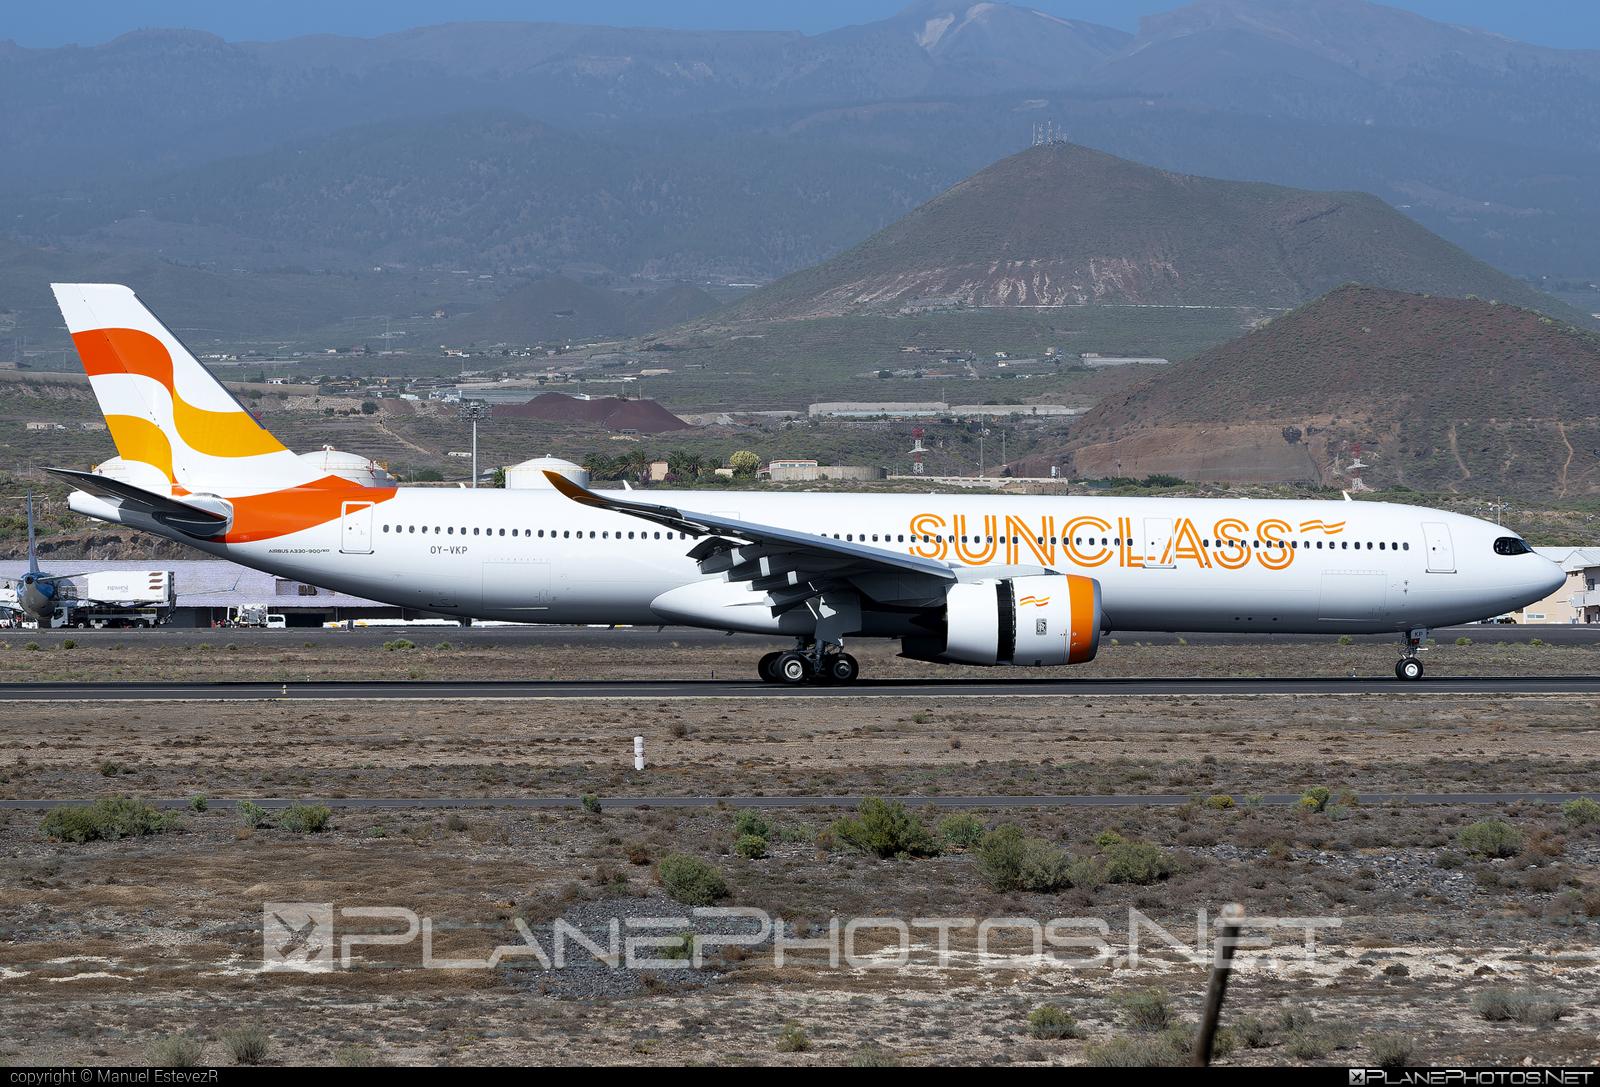 Airbus A330-941N - OY-VKP operated by Sunclass Airlines #SunclassAirlines #a330 #a330family #a330neo #airbus #airbus330